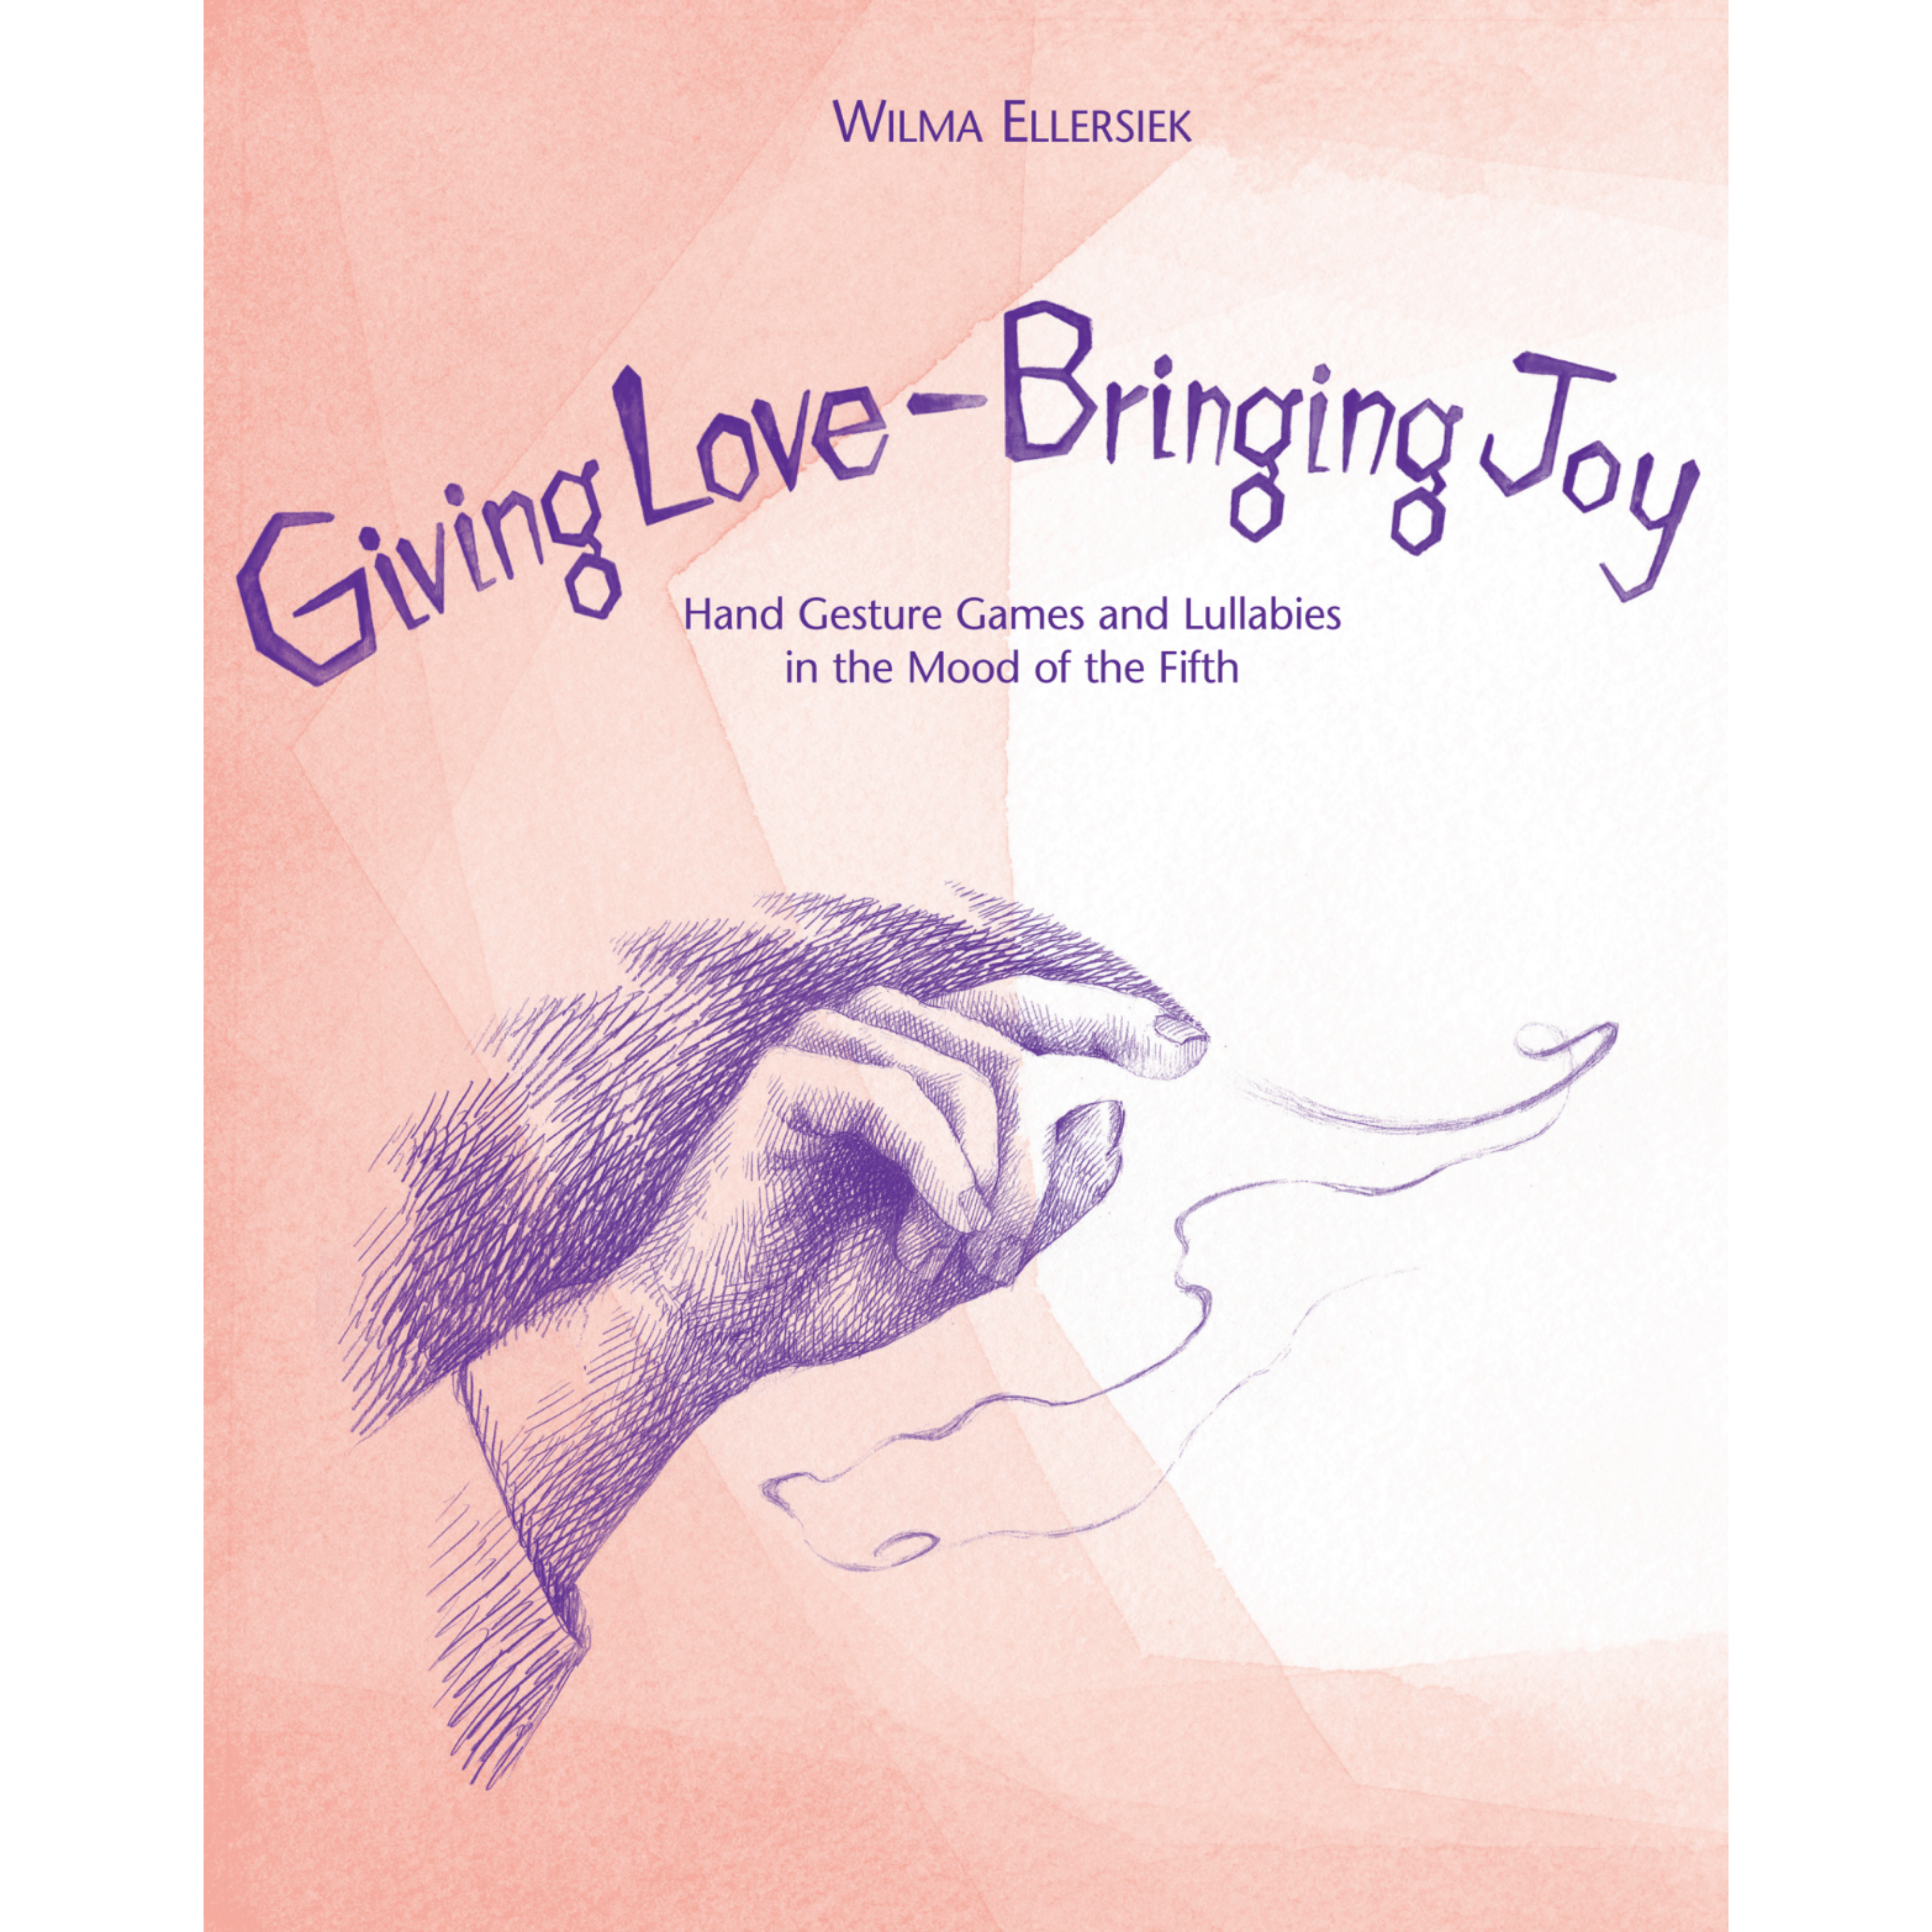 Giving Love, Bringing Joy - Hand Gesture Games and Lullabies in the Mood of the Fifth, for Children Between Birth and Nine